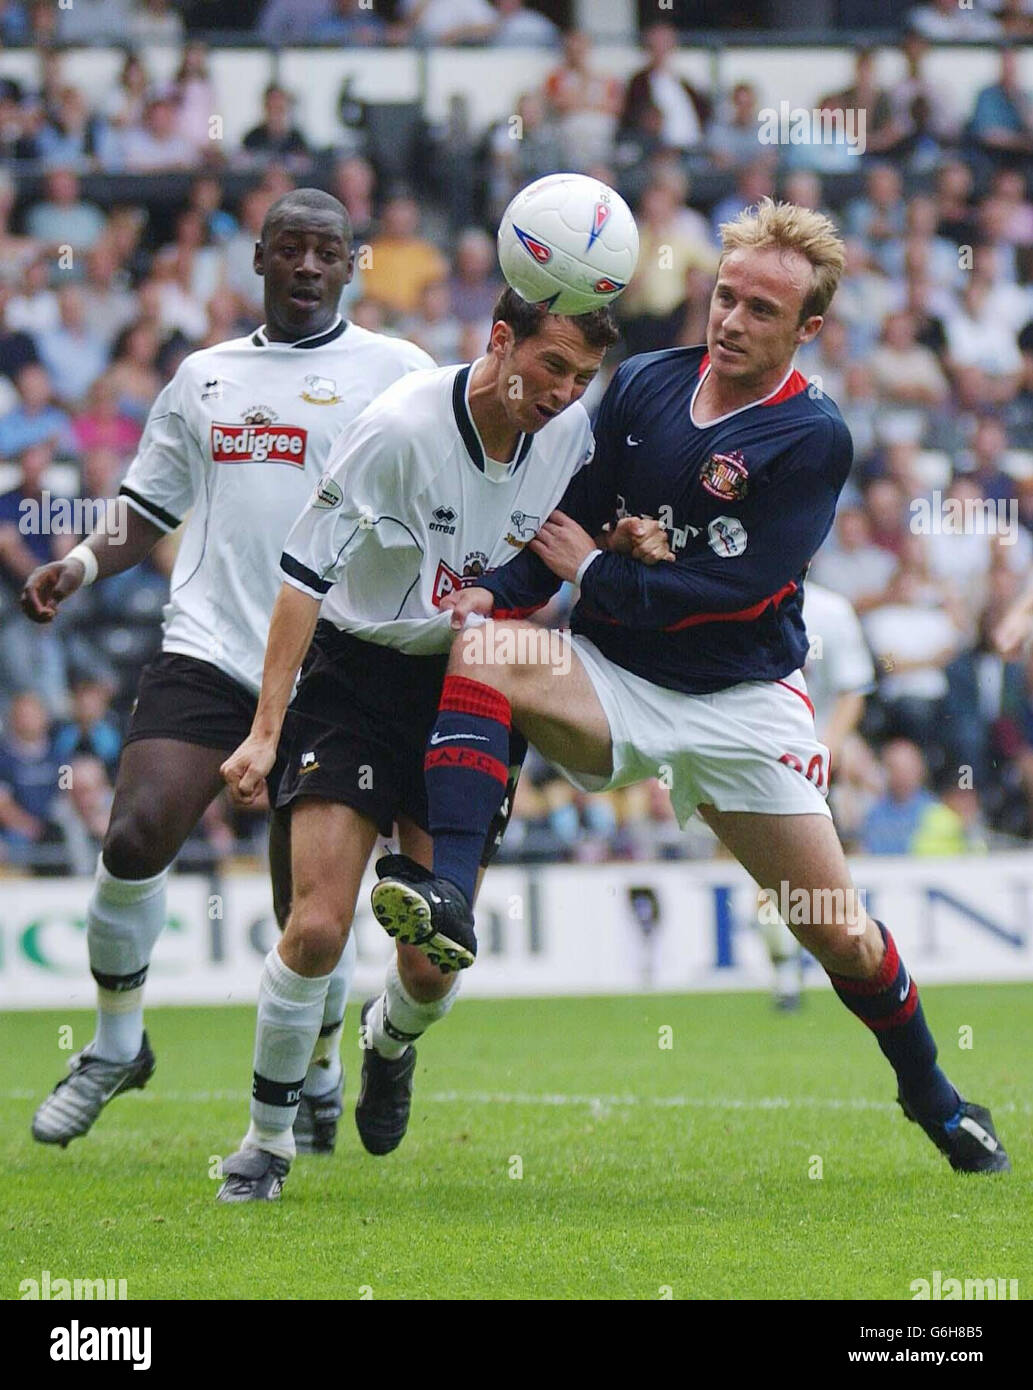 Derby County defender Richard Jackson clears with his head ahead of Sunderland's Thomas Butler during the Nationwide Division One match at Pride Park, Derby. NO UNOFFICIAL CLUB WEBSITE USE. Stock Photo